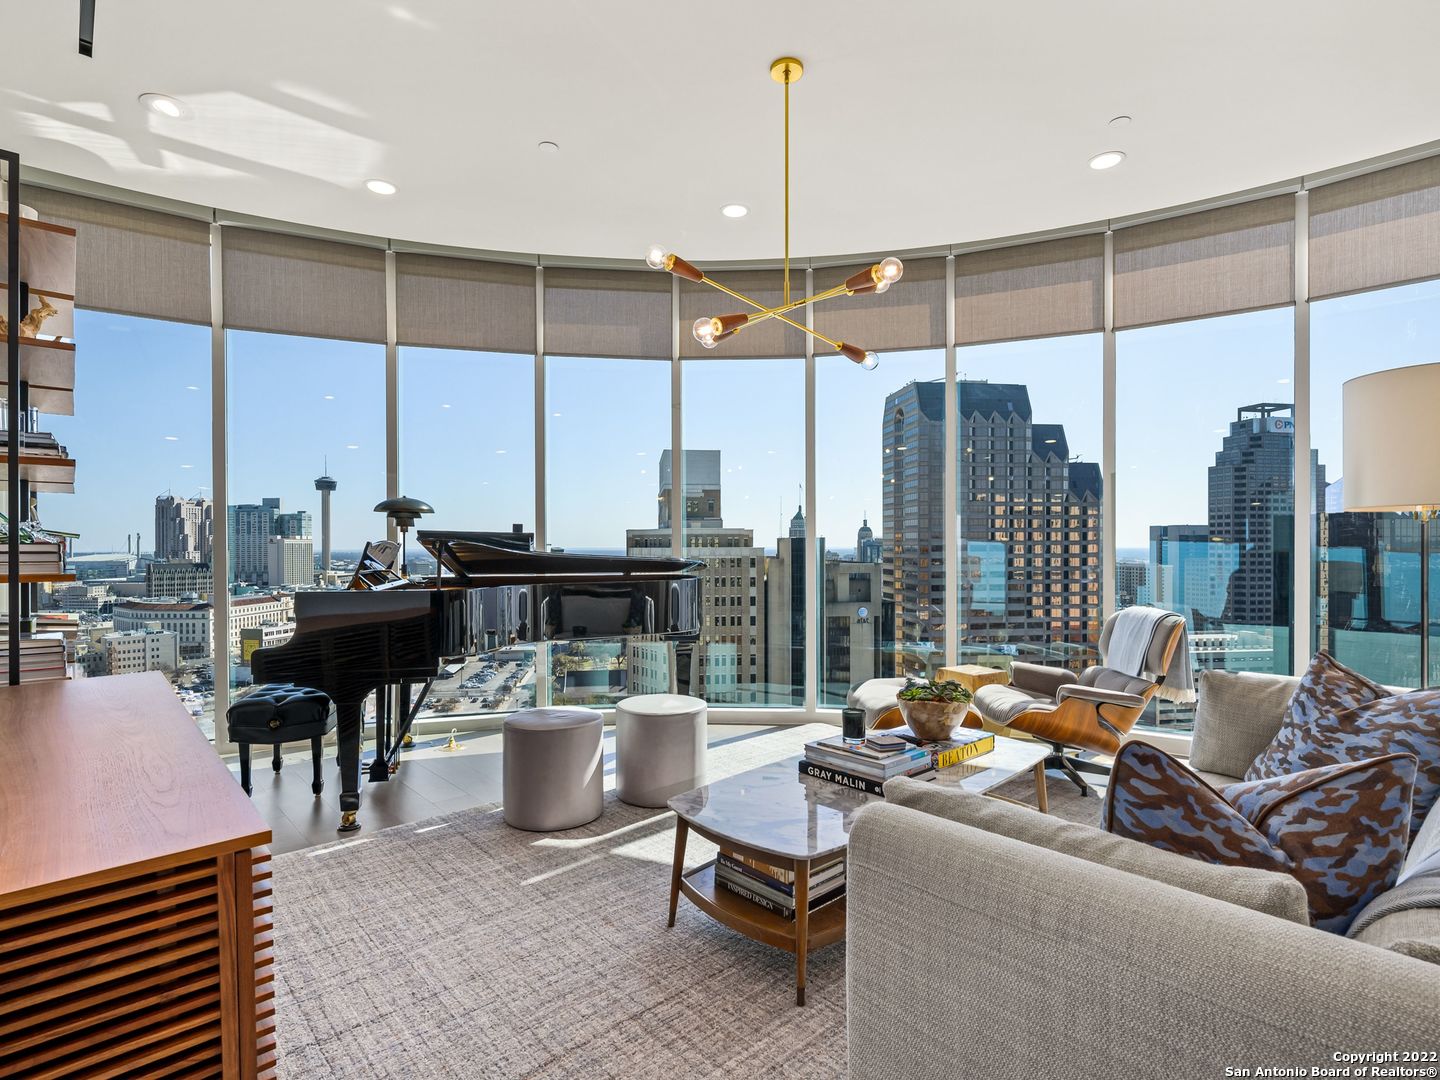 This most coveted floor plan at The Arts Residences in downtown San Antonio has spectacular skyline views from an impressive, curved wall of glass. The Picasso, a 2,126 sf residence with two living spaces and a balcony with sunrise views. Each of the 3 bedrooms has a private bath and nice separation from the other bedrooms. The kitchen has sleek all-white cabinetry with quartz countertops, Italian Pedini cabinetry, Thermador appliances, and gas cooking. This residence has been customized with designer wallpaper, light fixtures, electric shades and built-out closets. Two parking spots and two storage units are included.     Located above the Thompson Hotel, amenities like 24-hour concierge, valet parking, and optional housekeeping and linen service offer a low-maintenance lifestyle. Residents have full access to the Thompson pool with cabanas, bar, and cafe. The hotel spa has a steam room and sauna and offers in-home massages. Other services available include dog walking, car detailing, personal shopping, housekeeping, linen service, and dry cleaning. While LandRace offers riverside seating downstairs, The Moon's Daughters has rooftop dining and cocktails upstairs. Located on a quiet part of the river next to The Tobin Center for the Performing Arts, residents enjoy preferred access and ticket purchases to all shows at The Tobin. Come experience The Art of Living Beautifully.